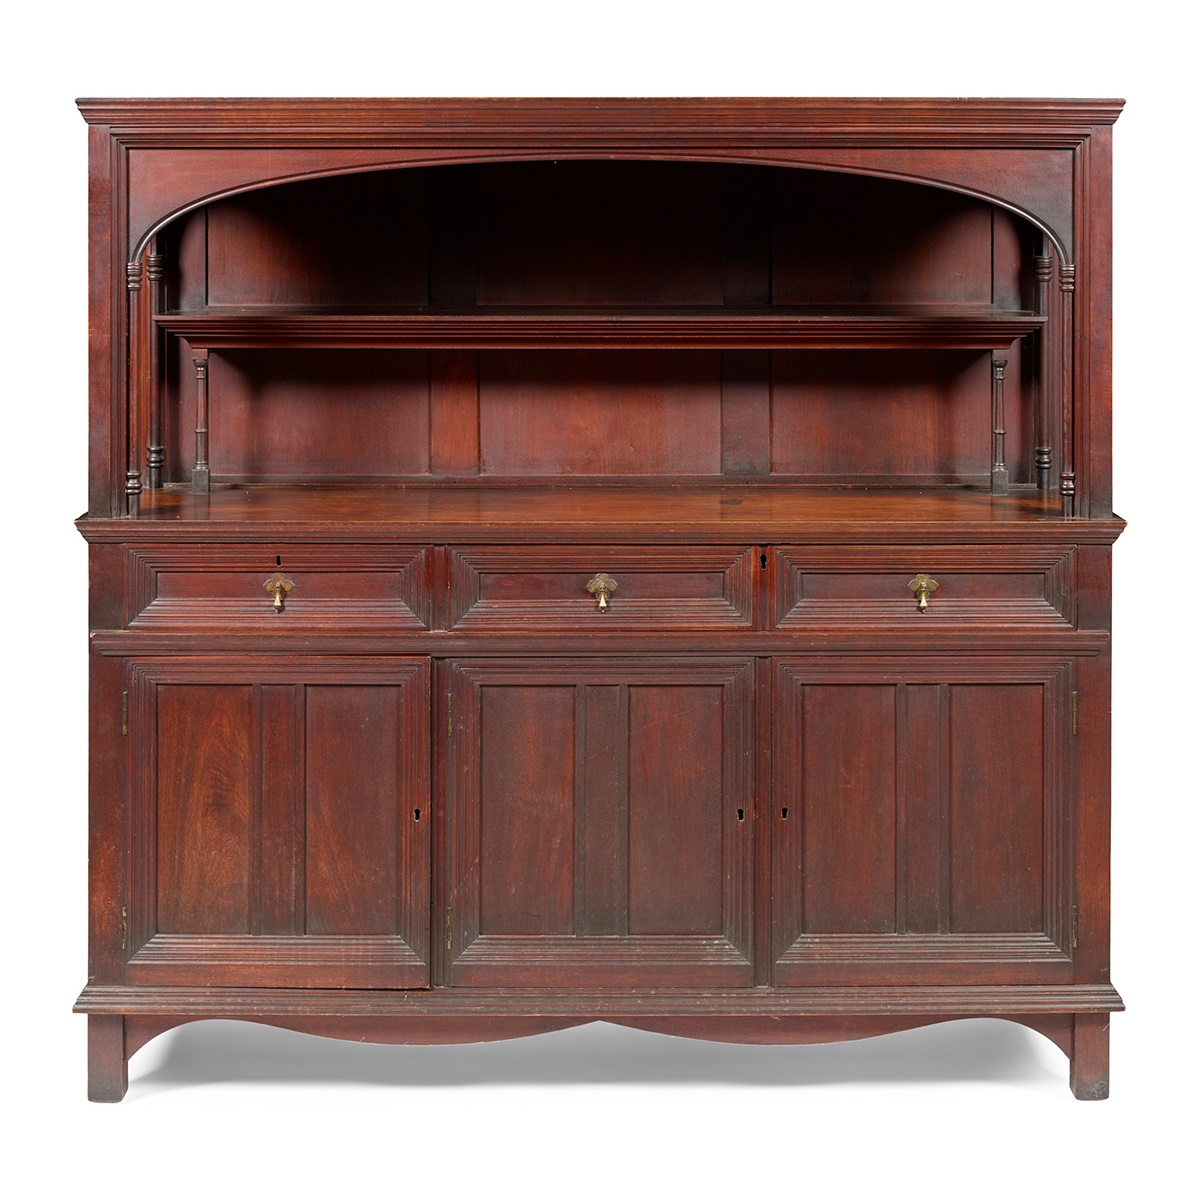 LOT 196 | PHILIP SPEAKMAN WEBB (1831-1915) FOR MORRIS & CO. | ARTS & CRAFTS DRAWING ROOM CABINET, CIRCA 1870 | £4,000 - £6,000 + fees